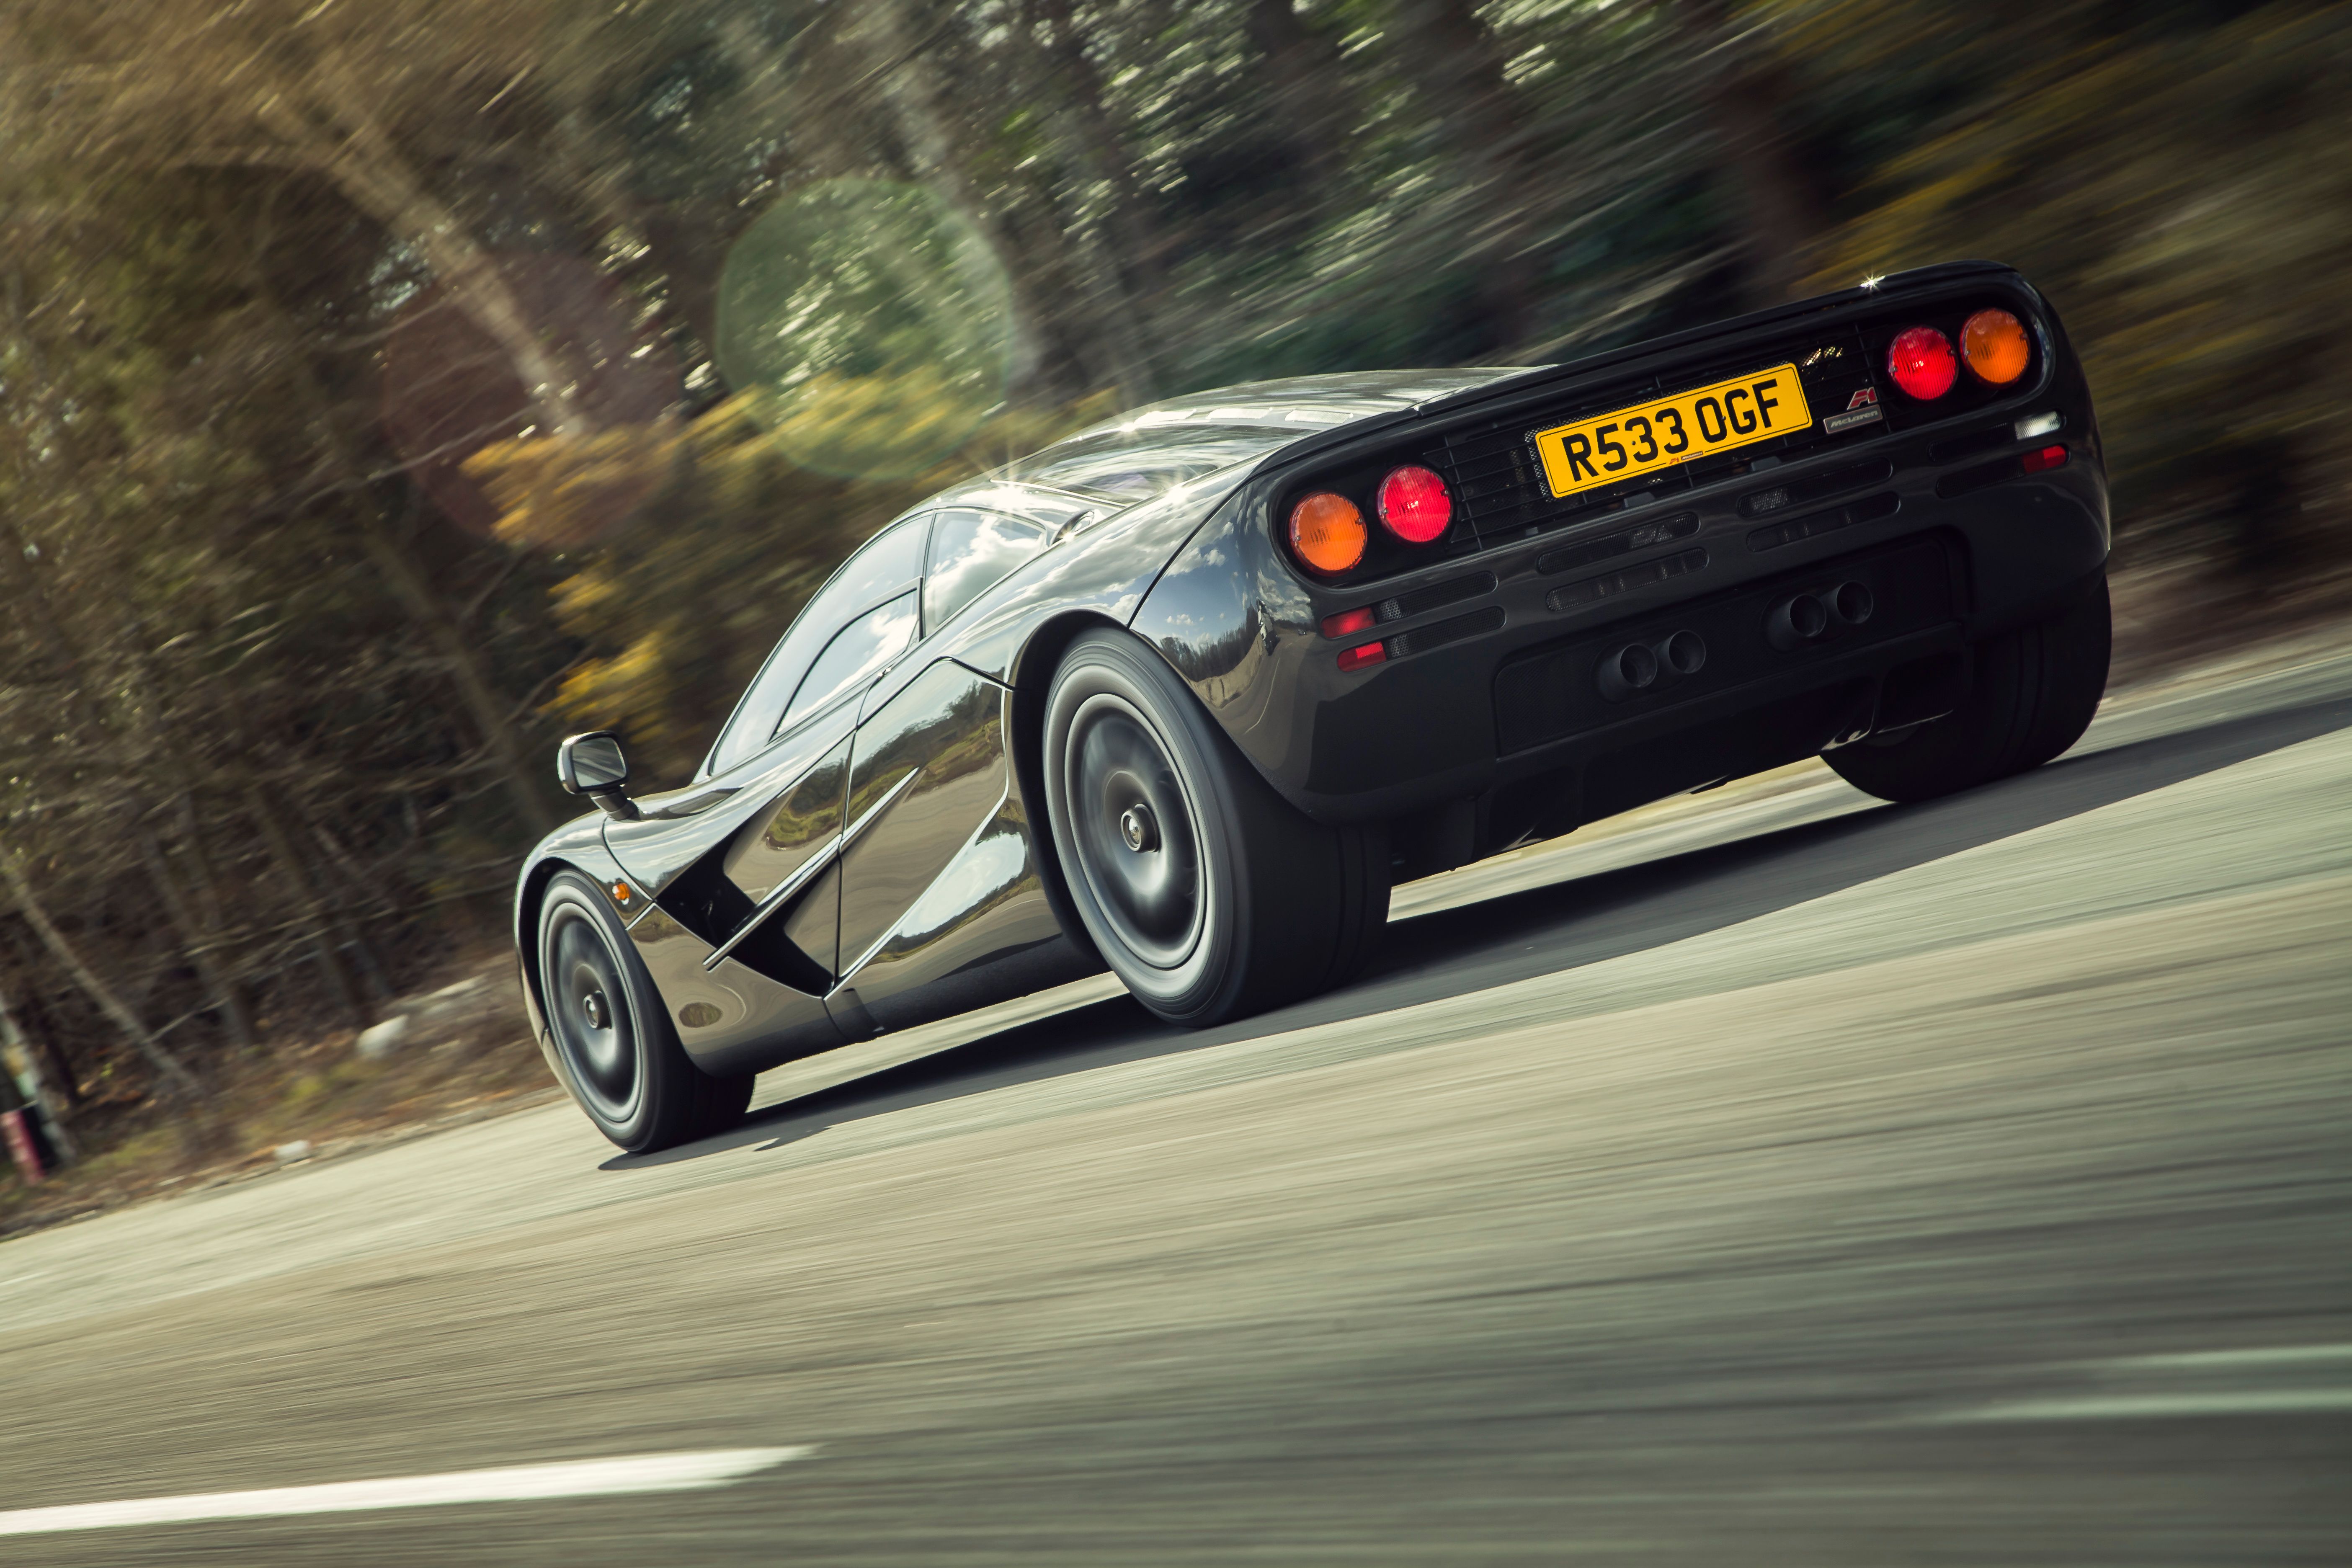 Used McLaren F1 1992-1998 review